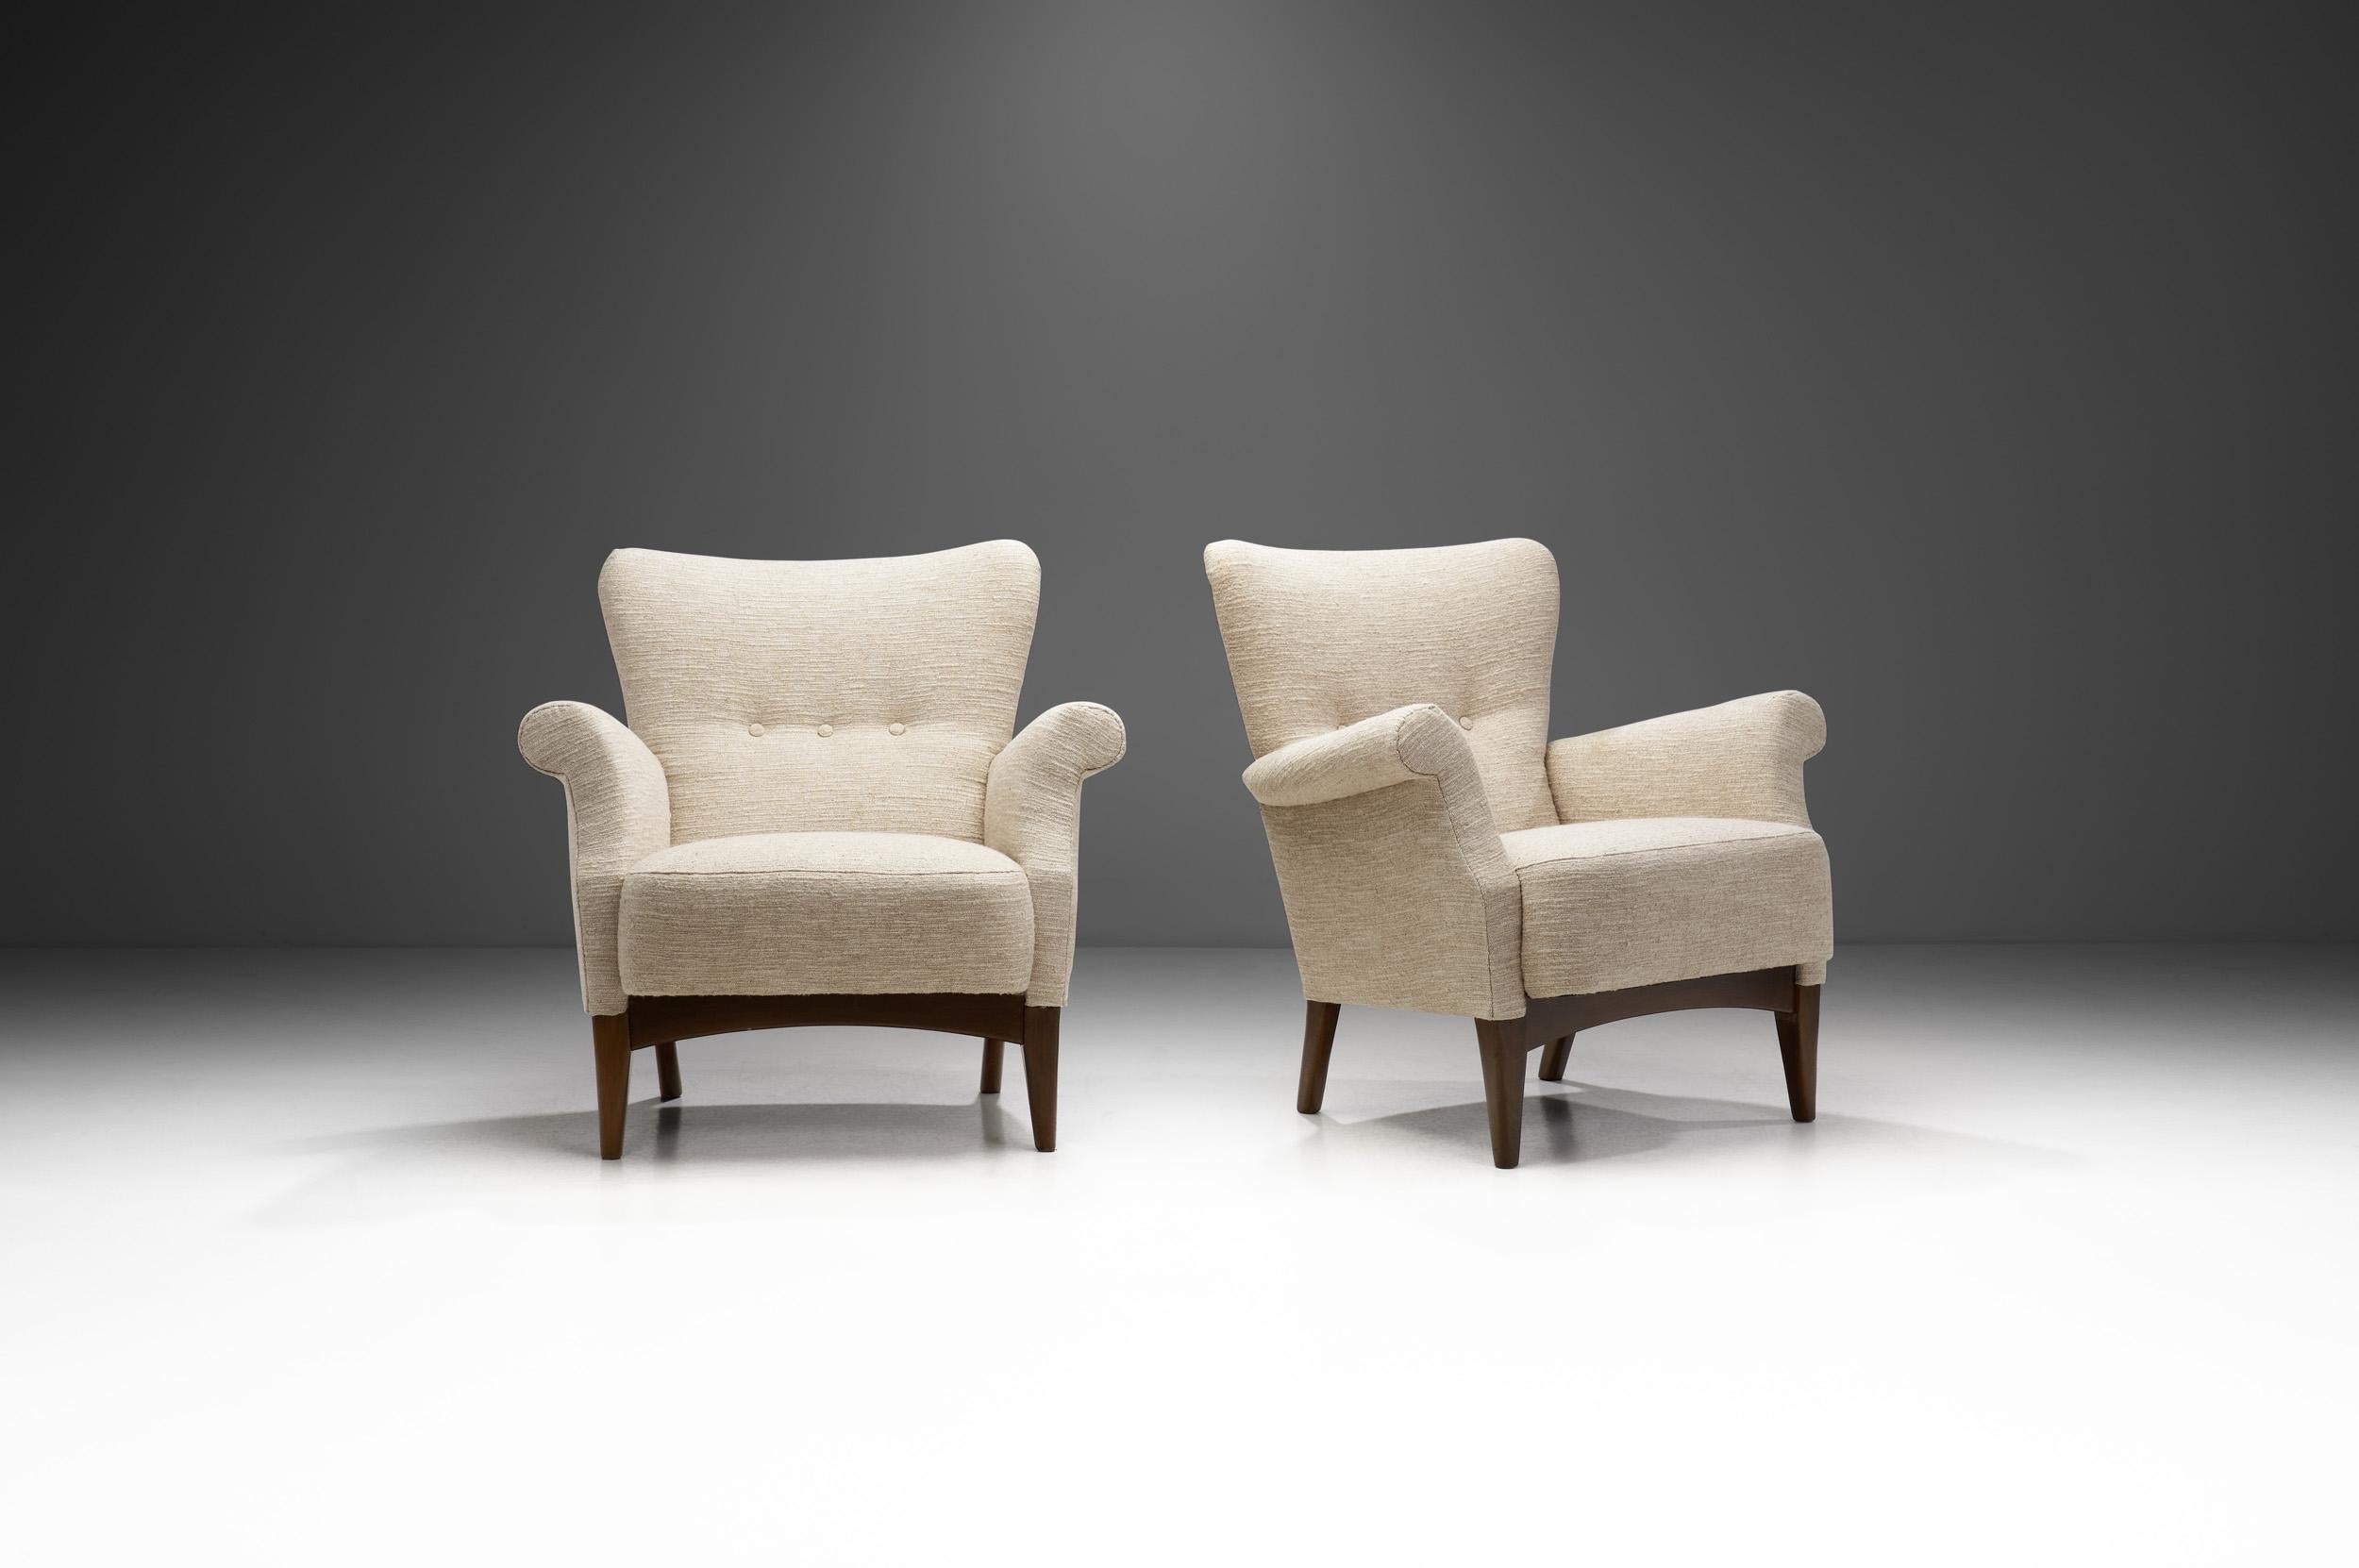 Throughout Scandinavia, there's a long history of pride in craftsmanship which is especially true of Denmark and one of its most reputable furniture makers, Fritz Hansen. This beautiful pair of armchairs is an exceptional flagbearer of Danish